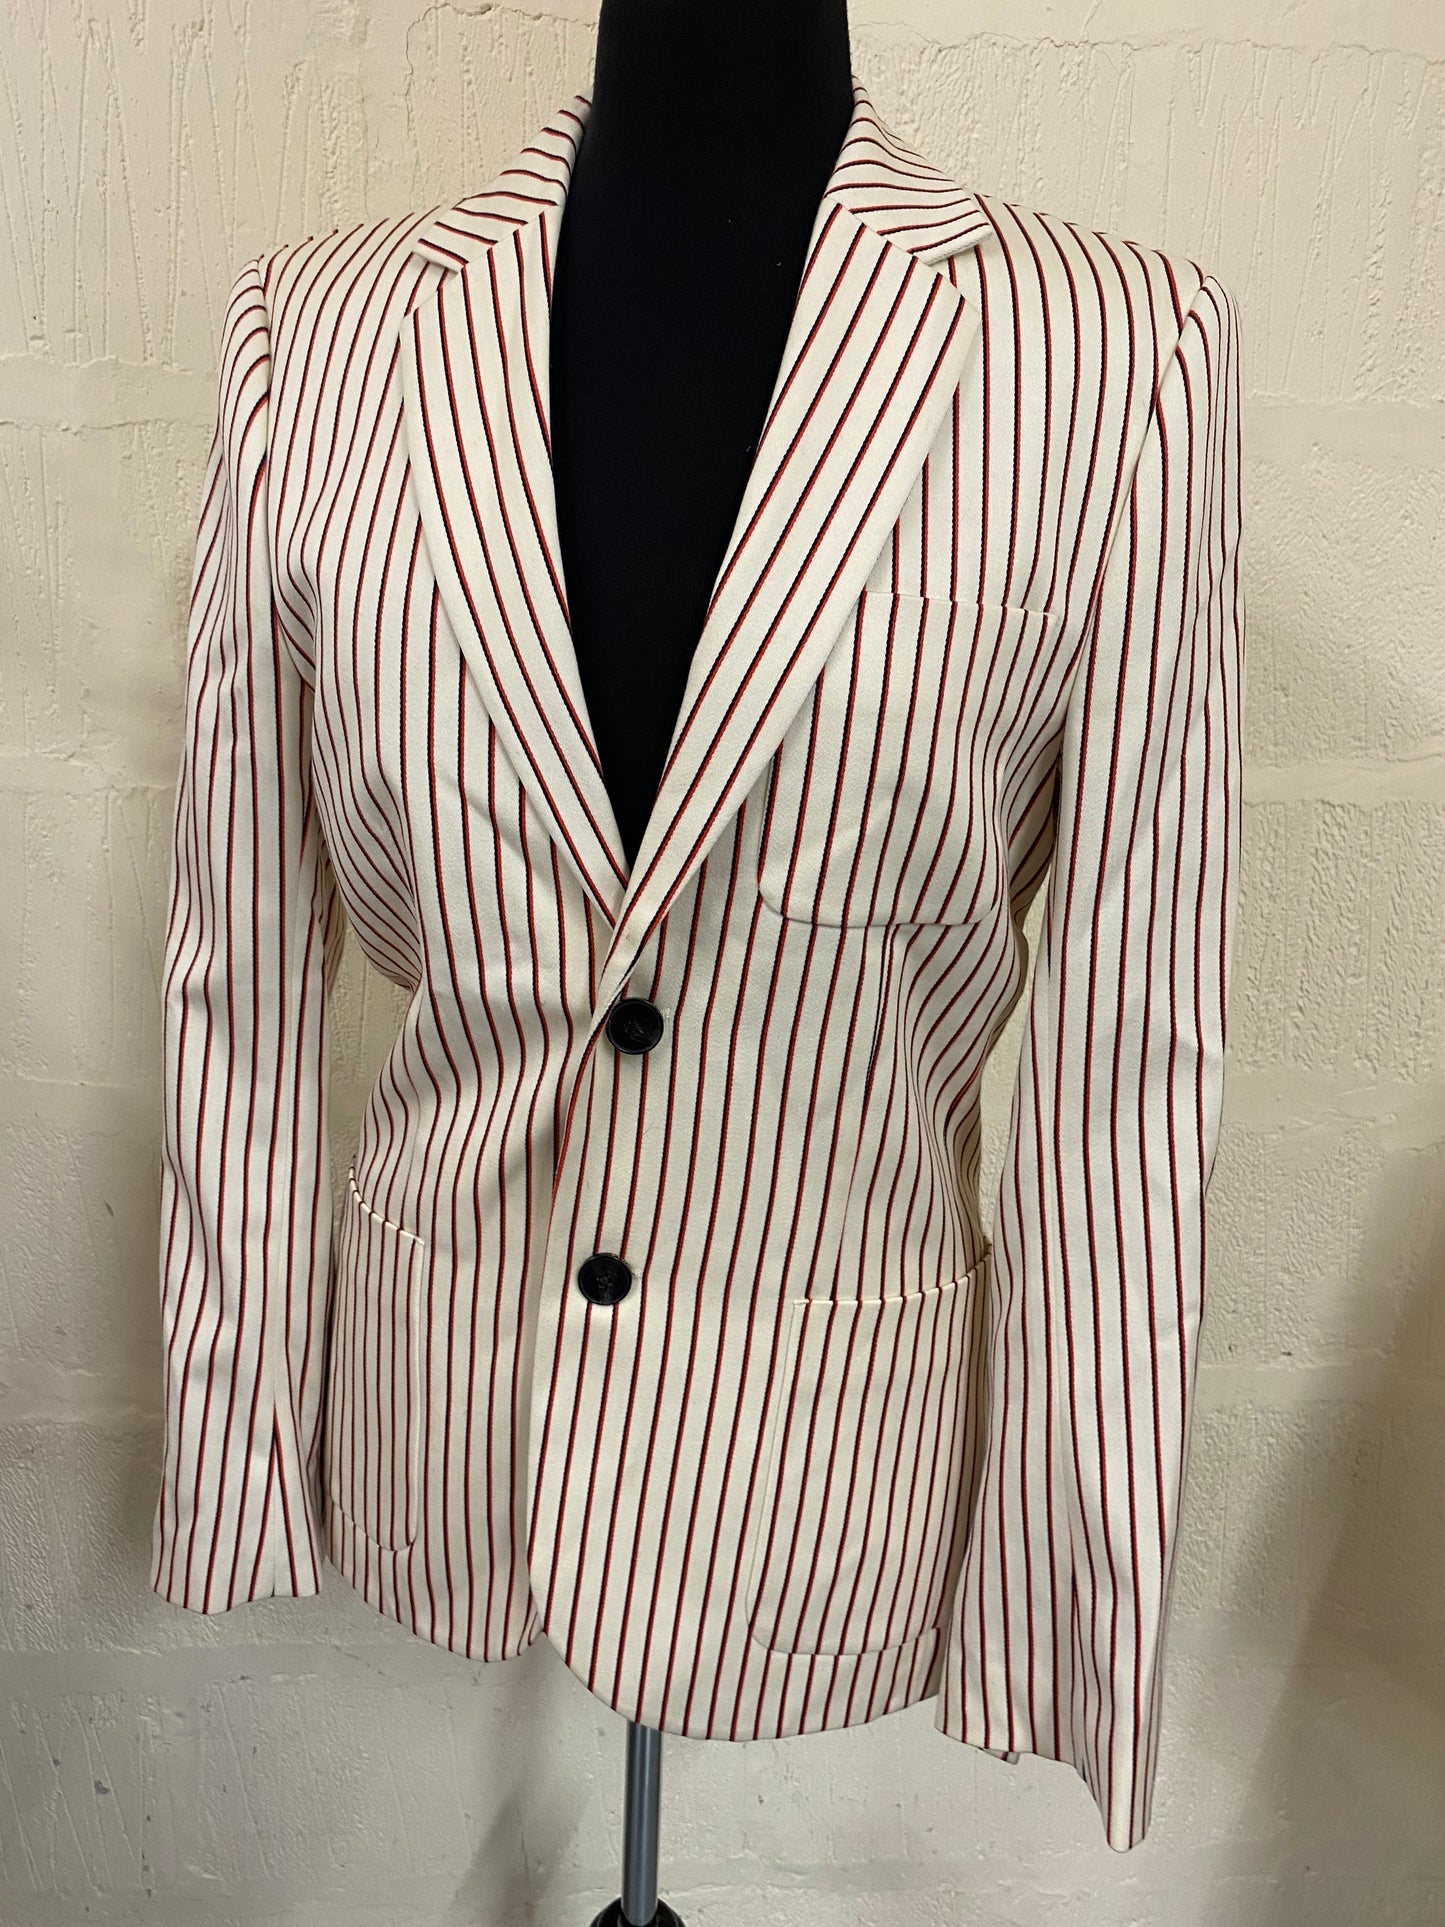 Jack Wills Cream with Navy and Red Pinstrip Mens Boating Blazer Size 10-12